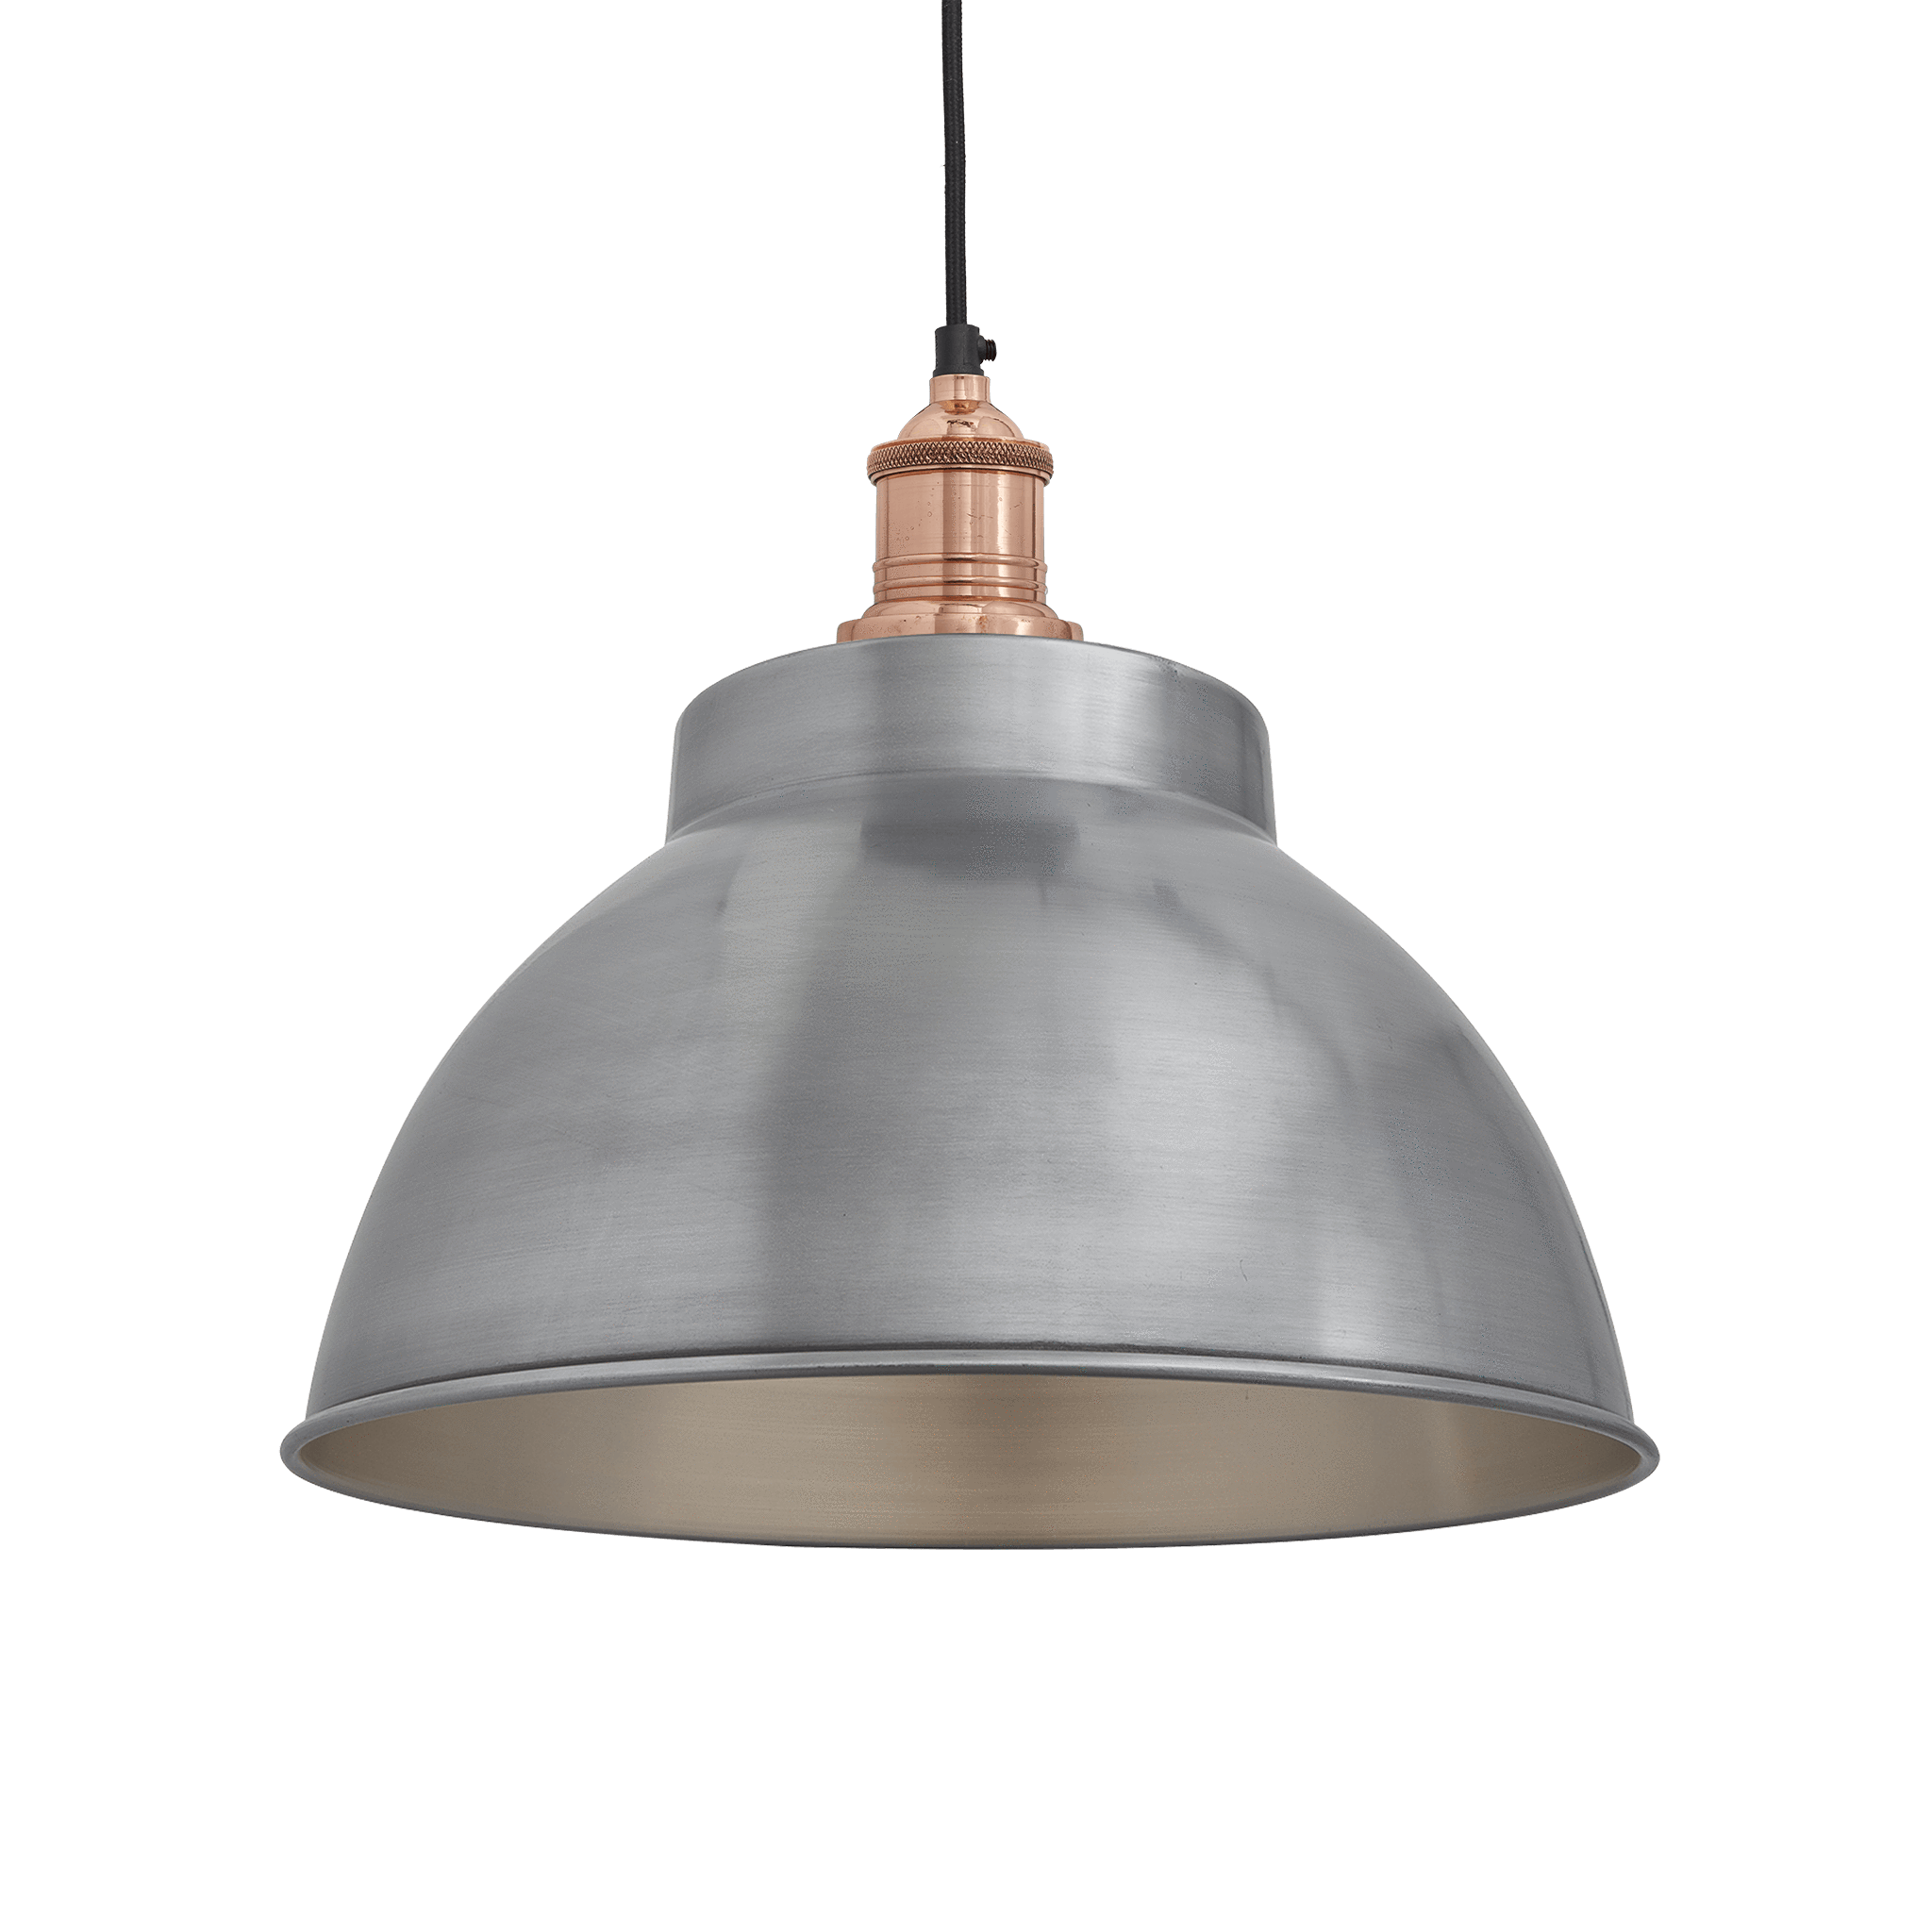 Industville Brooklyn Dome Pendant 13 Inch Light Pewter Dome Copper Holder Copper